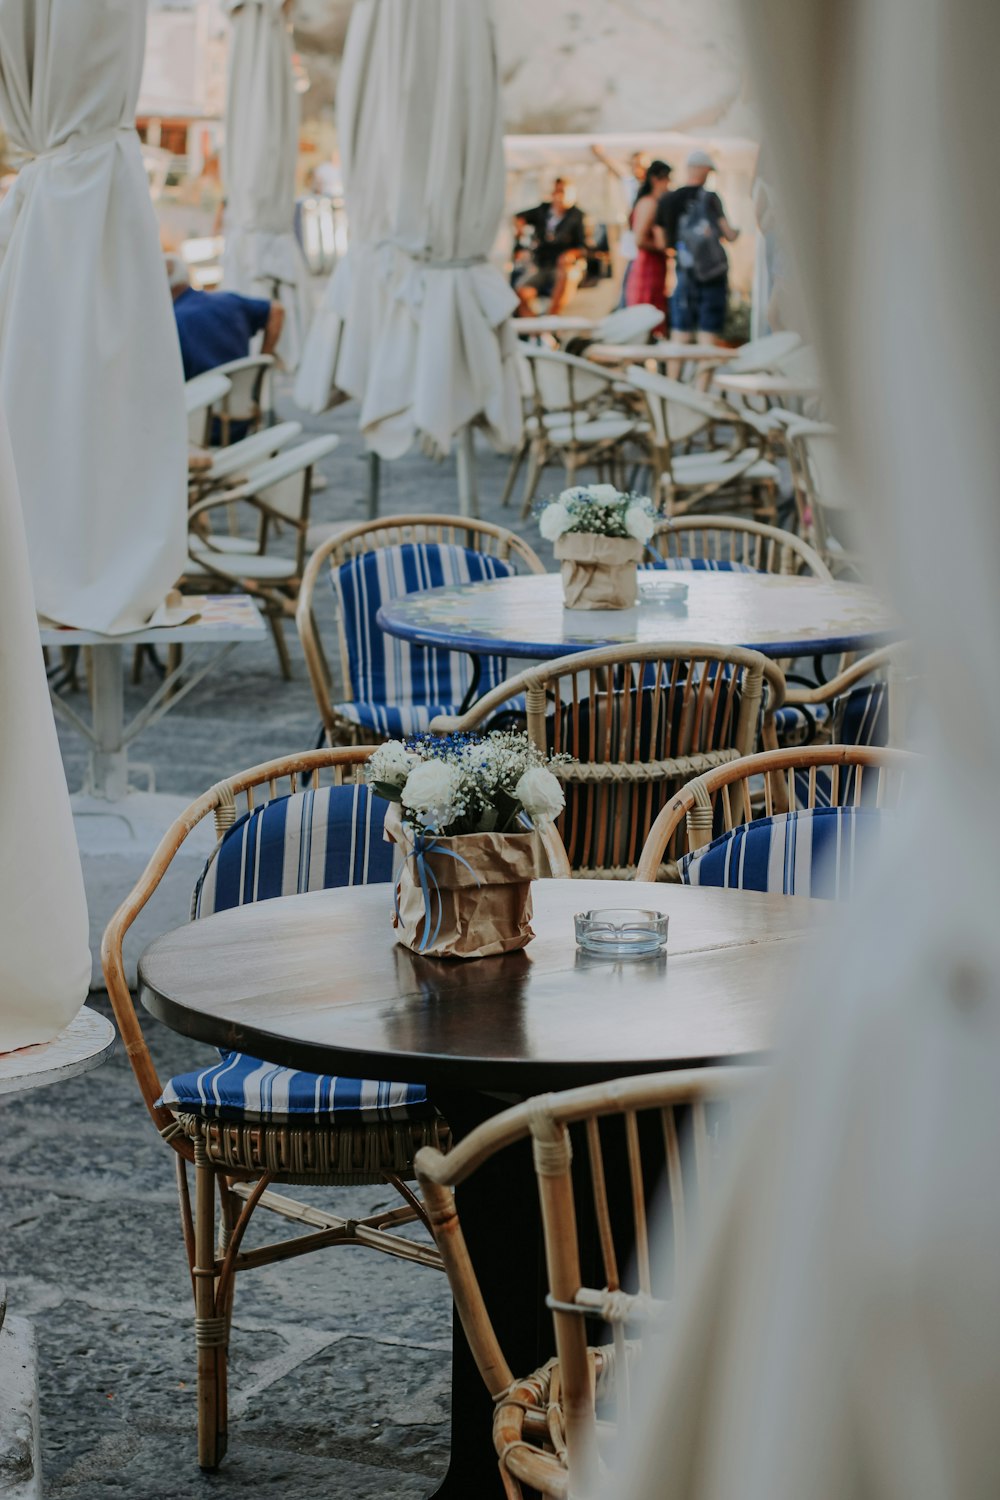 tables and chairs with umbrellas in the background